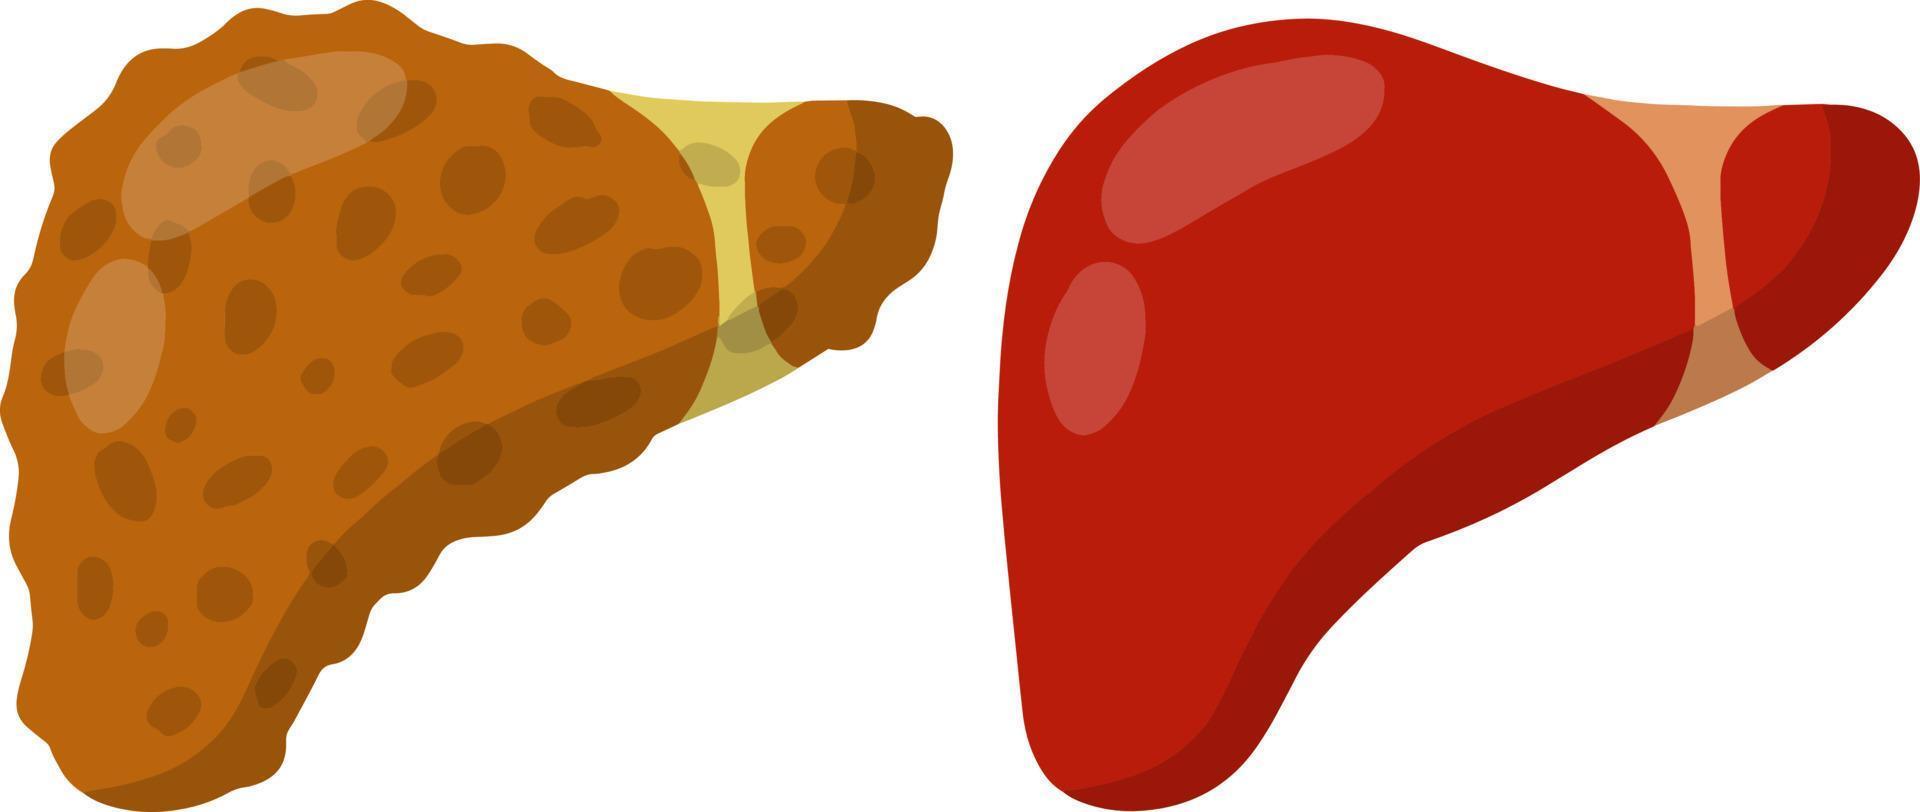 Healthy and diseased liver. Medical element. Biology and education. Health problem. Comparison of two internal organs of a person vector